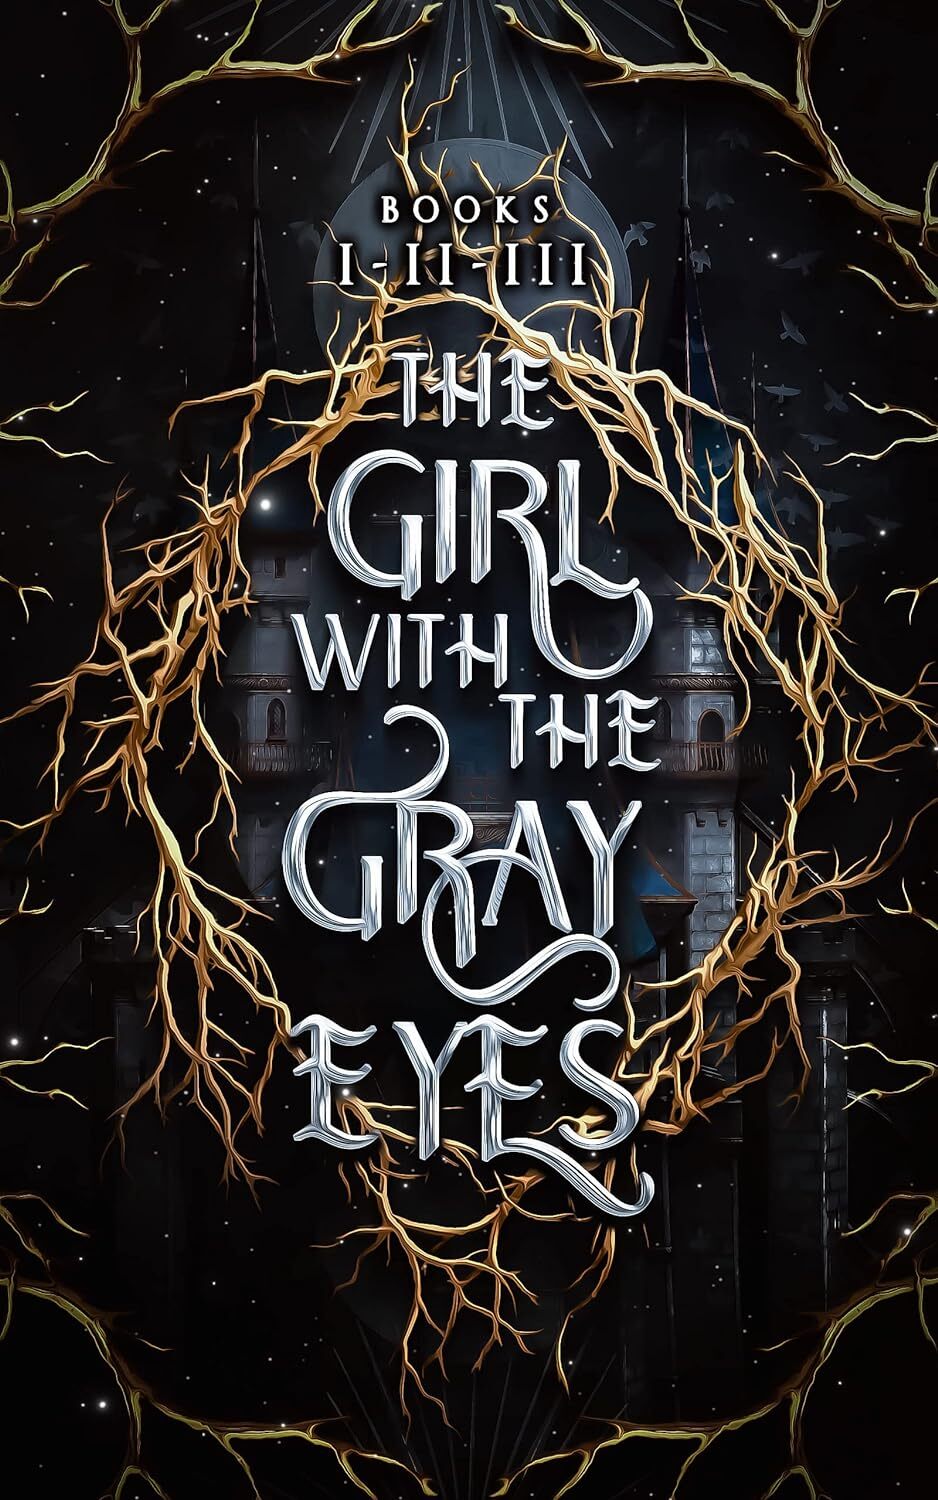 The Girl with the Gray Eyes: Complete Trilogy [Book 1-3] by L.V. Lane